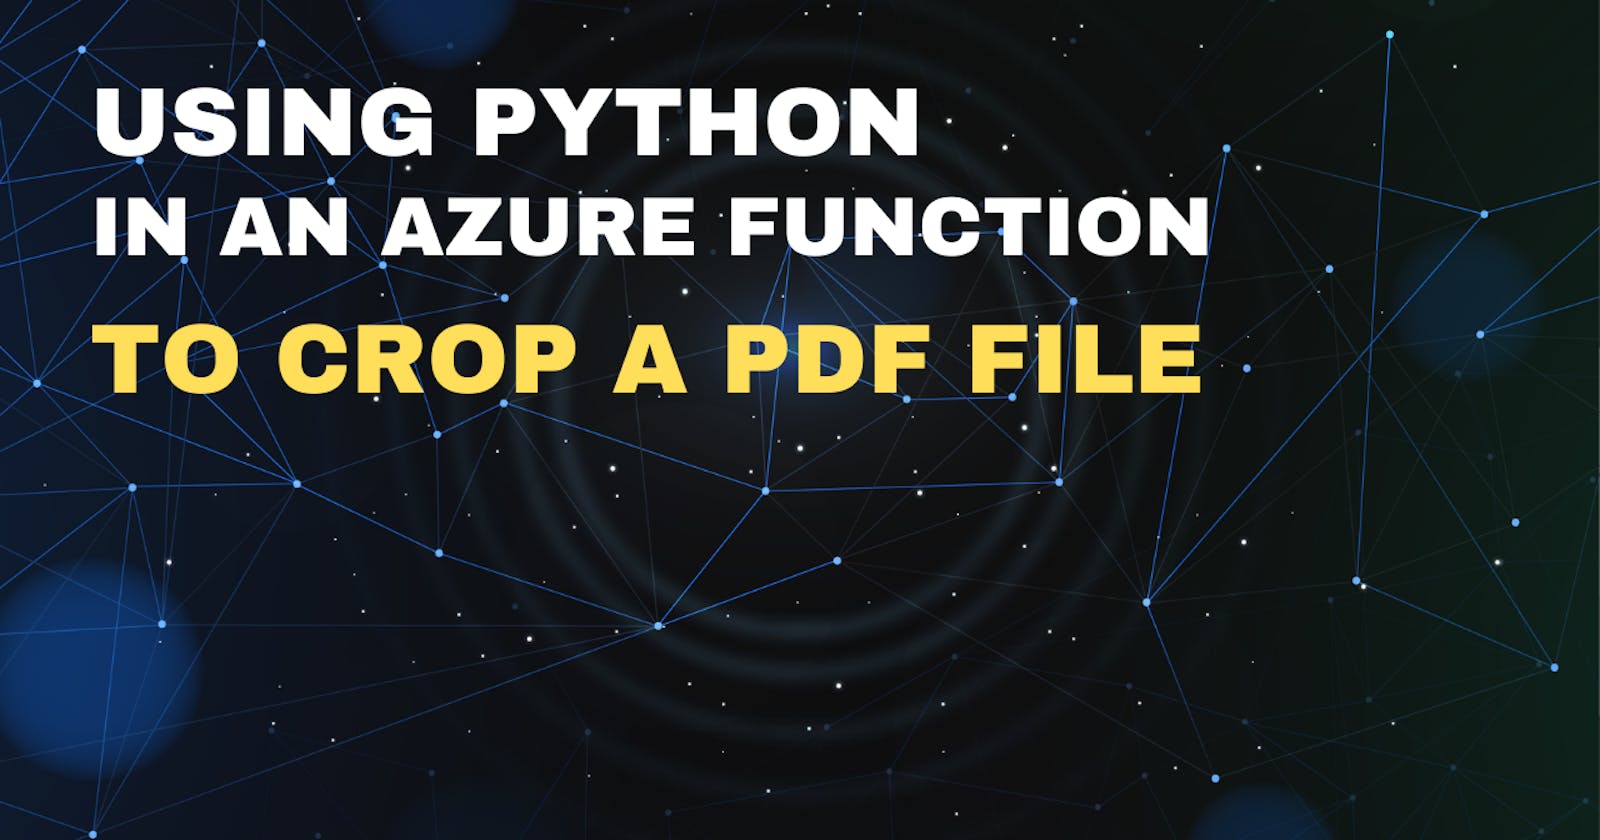 Using Python in an Azure Function to crop a PDF file